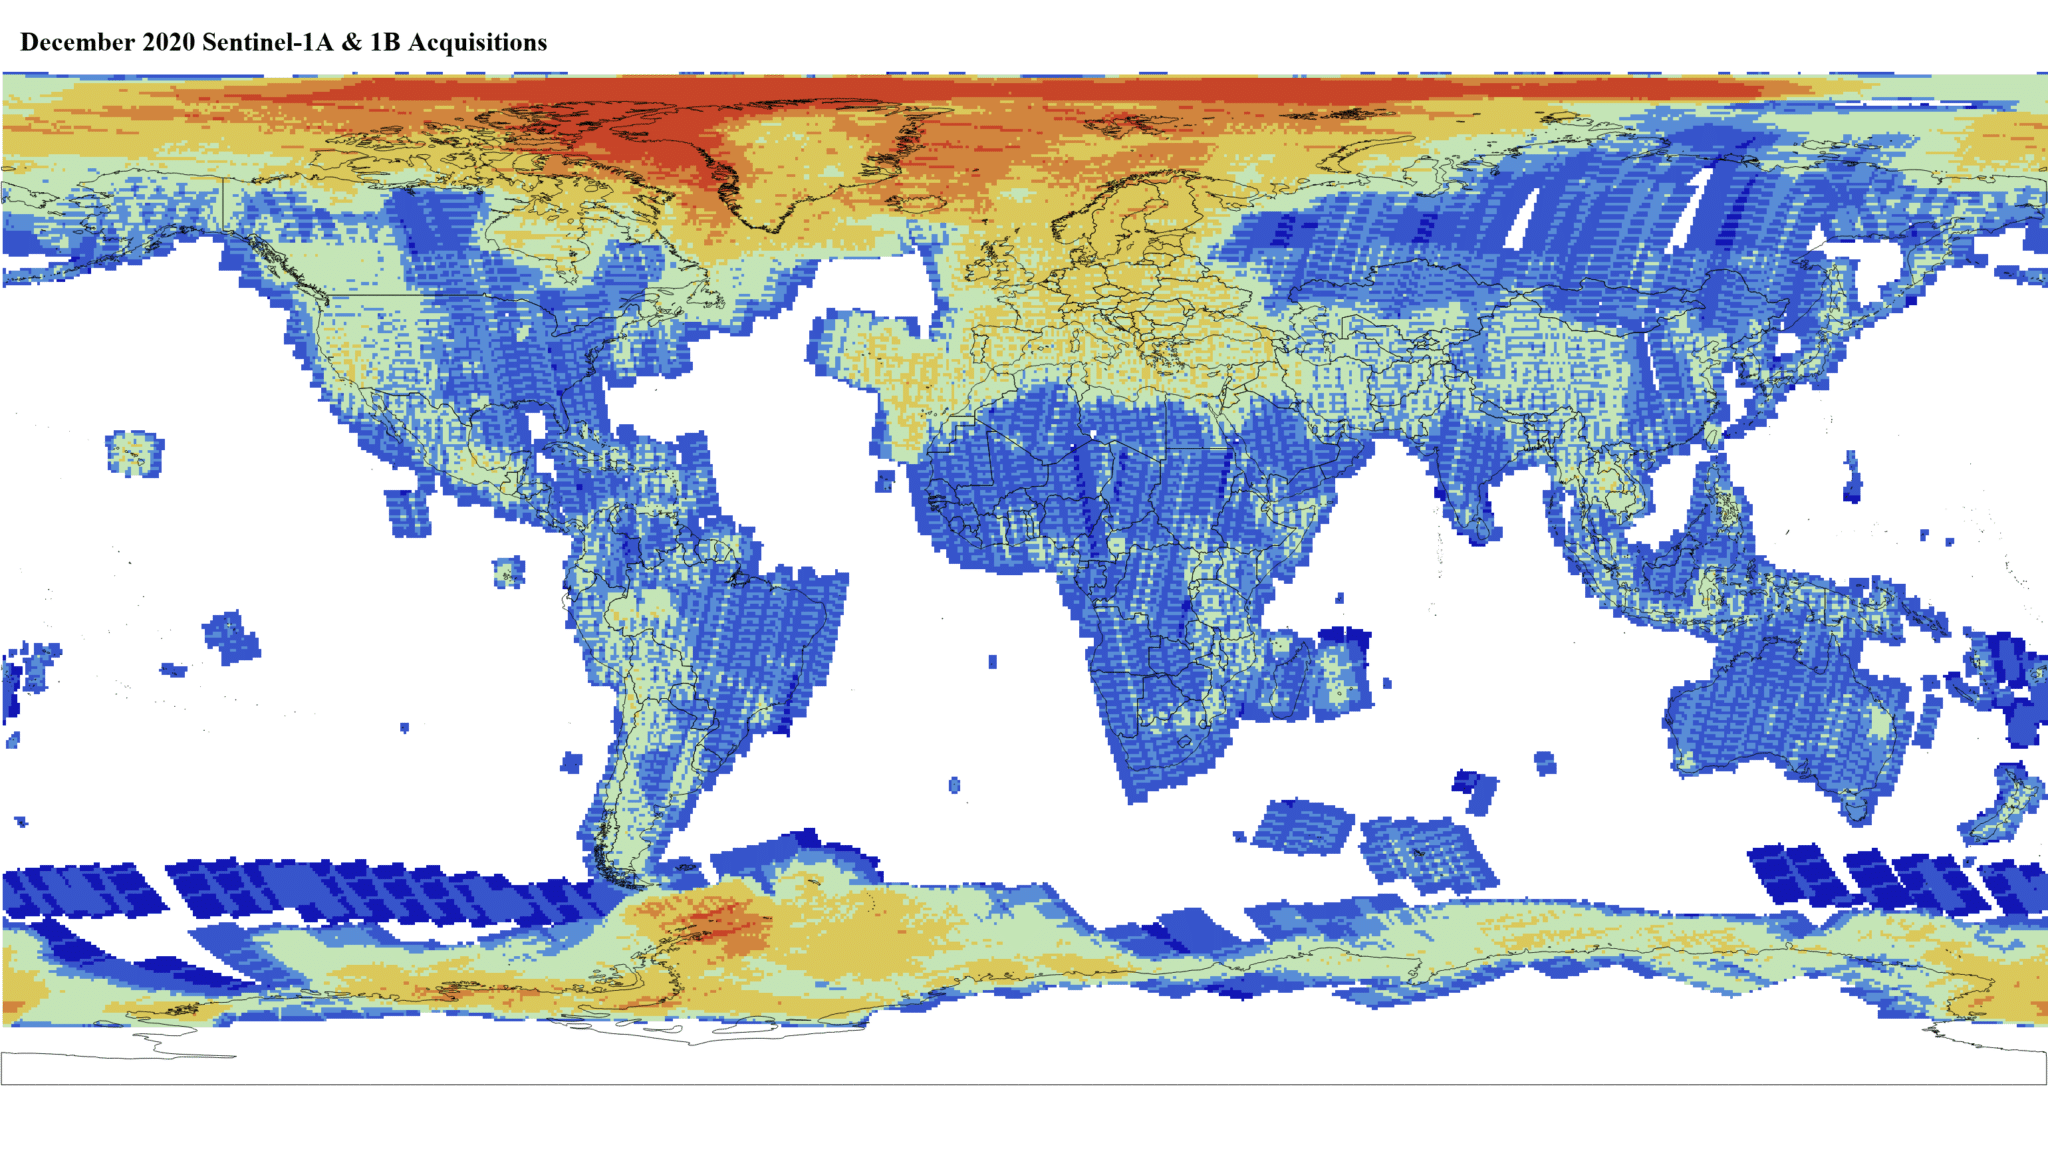 Heat map of Sentinel-1A and -1B GRD global acquisitions December 2020